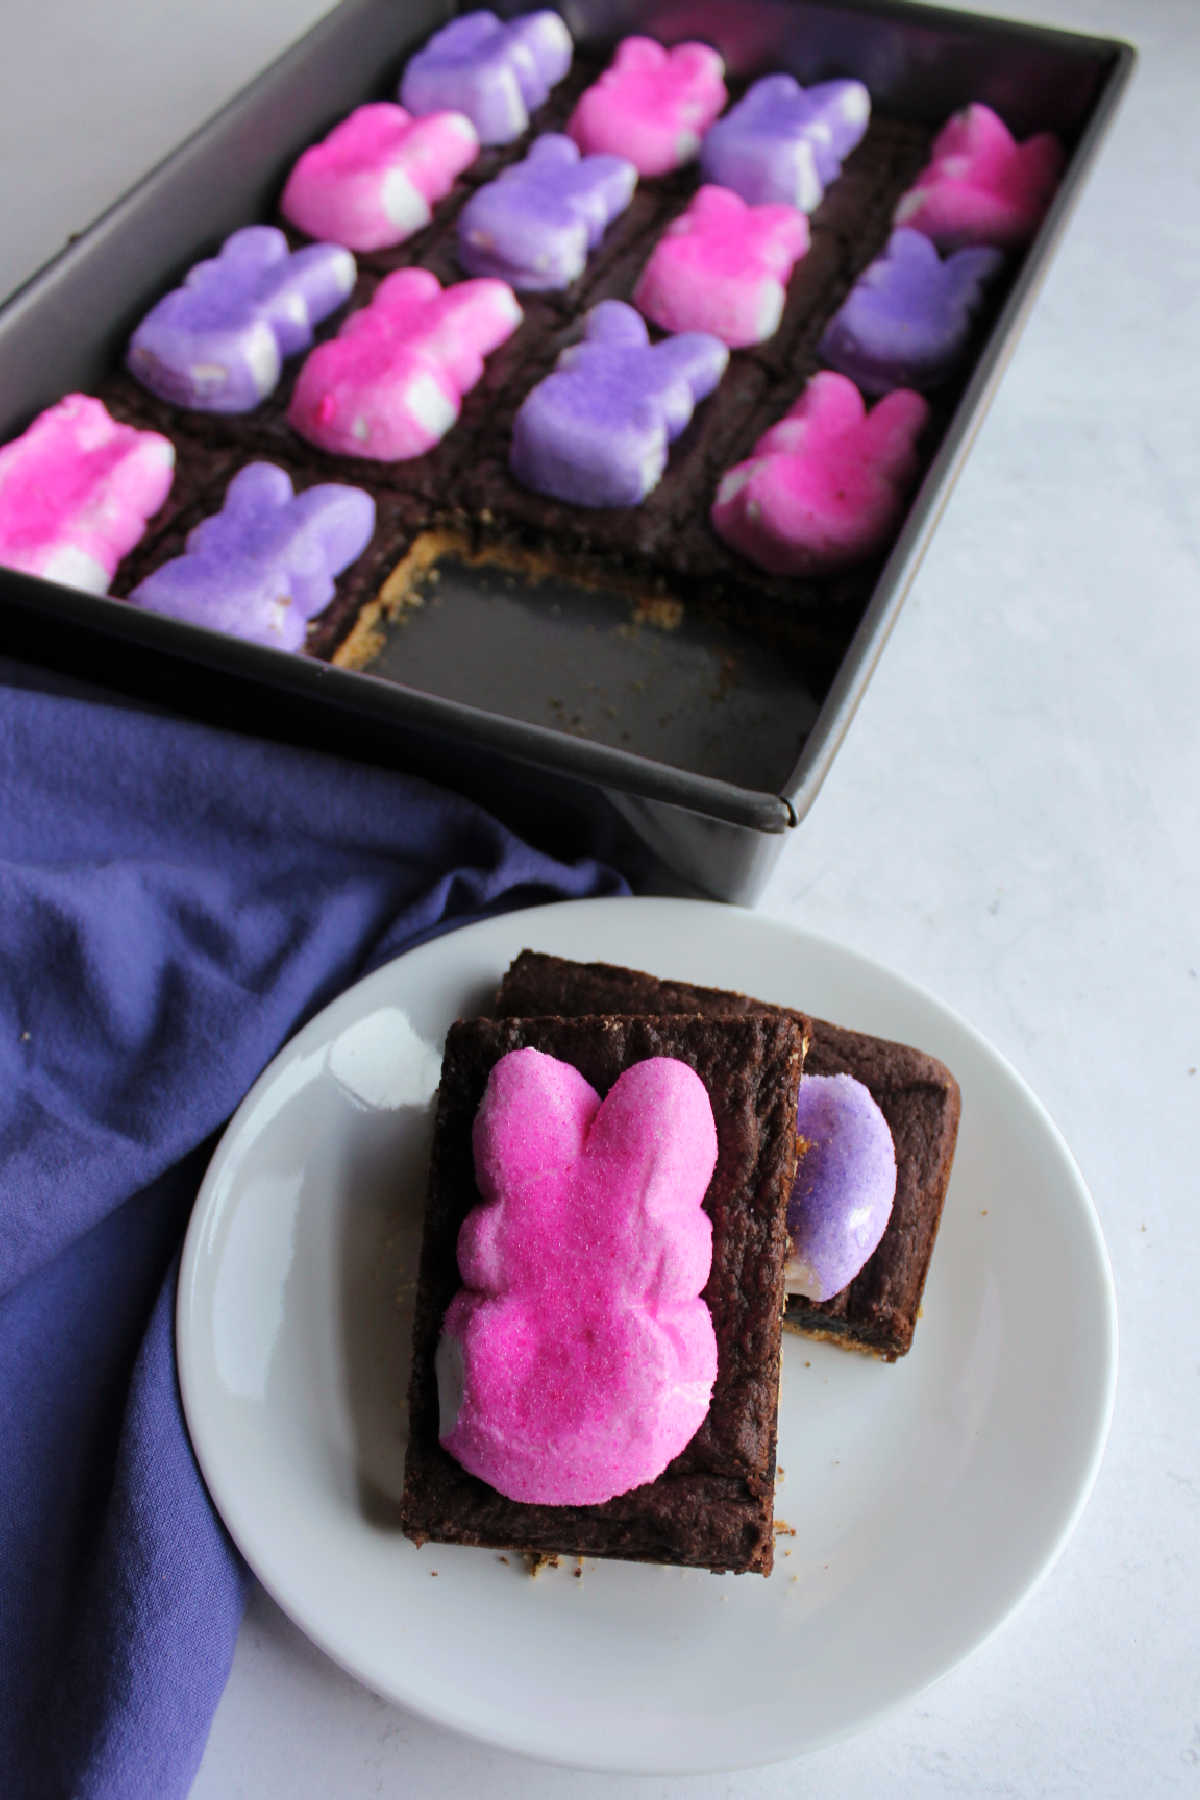 Peep smore bars with pink and purple bunny peeps, a gooey chocolate layer and graham cracker base.